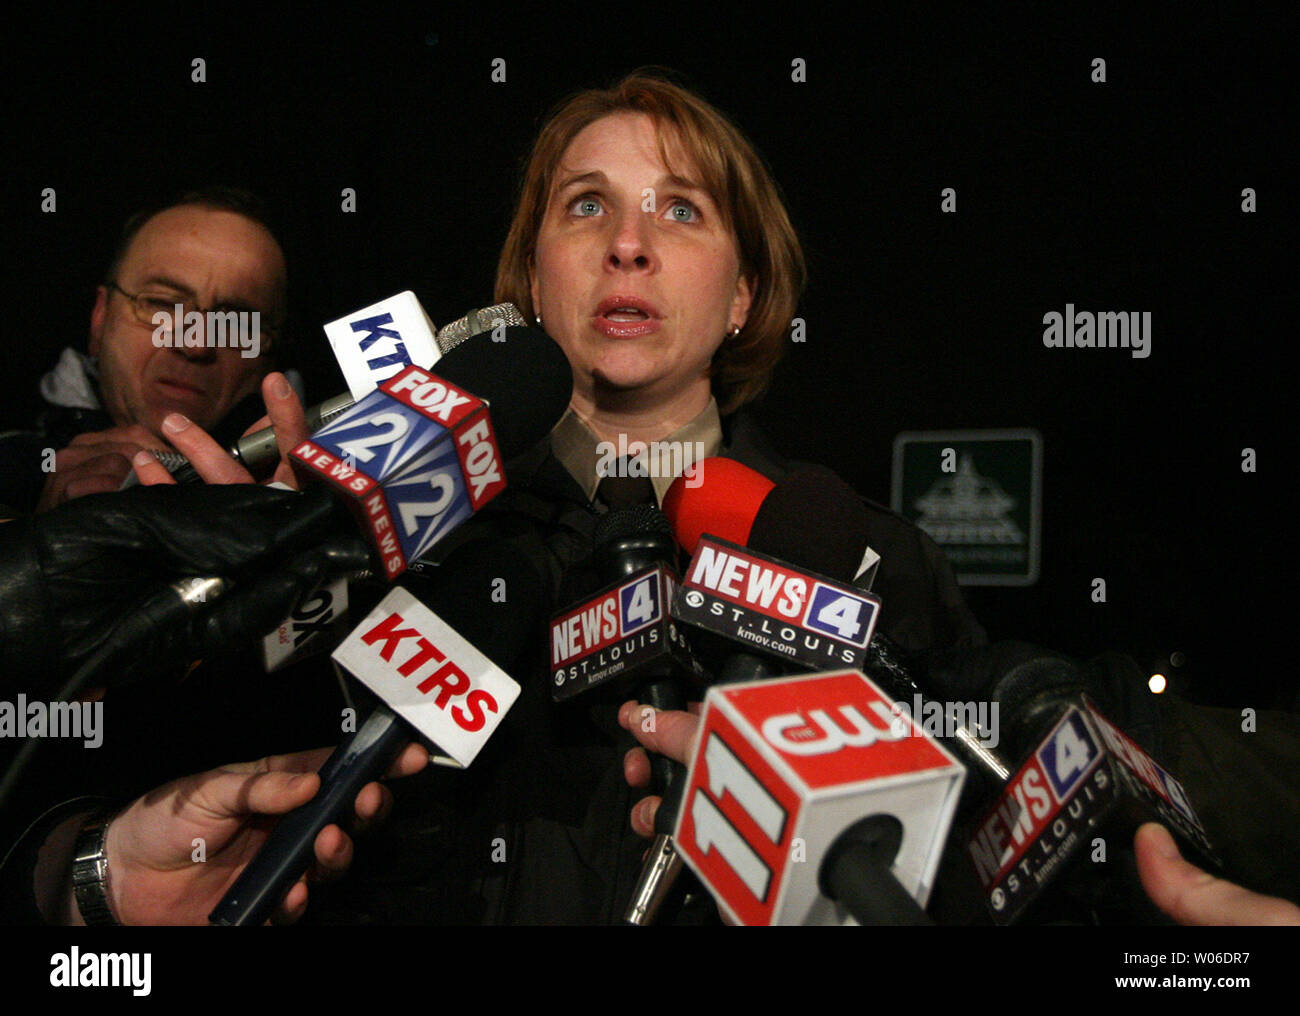 A tearful Tracy Panes, public information officer for the St. Louis County Police Department, gives her first press briefing outside of the Kirkwood City Hall following a shooting inside during a Planning and Zoning meeting that left six dead and two injured in Kirkwood, Missouri on February 7, 2008. Among the dead were two Kirkwood policeman and the gunman that was well known to the police. Two other injuries included the mayor who was shot in the head and is in critical condition and a newspaper reporter who was shot in the hand.     (UPI Photo/Bill Greenblatt) Stock Photo